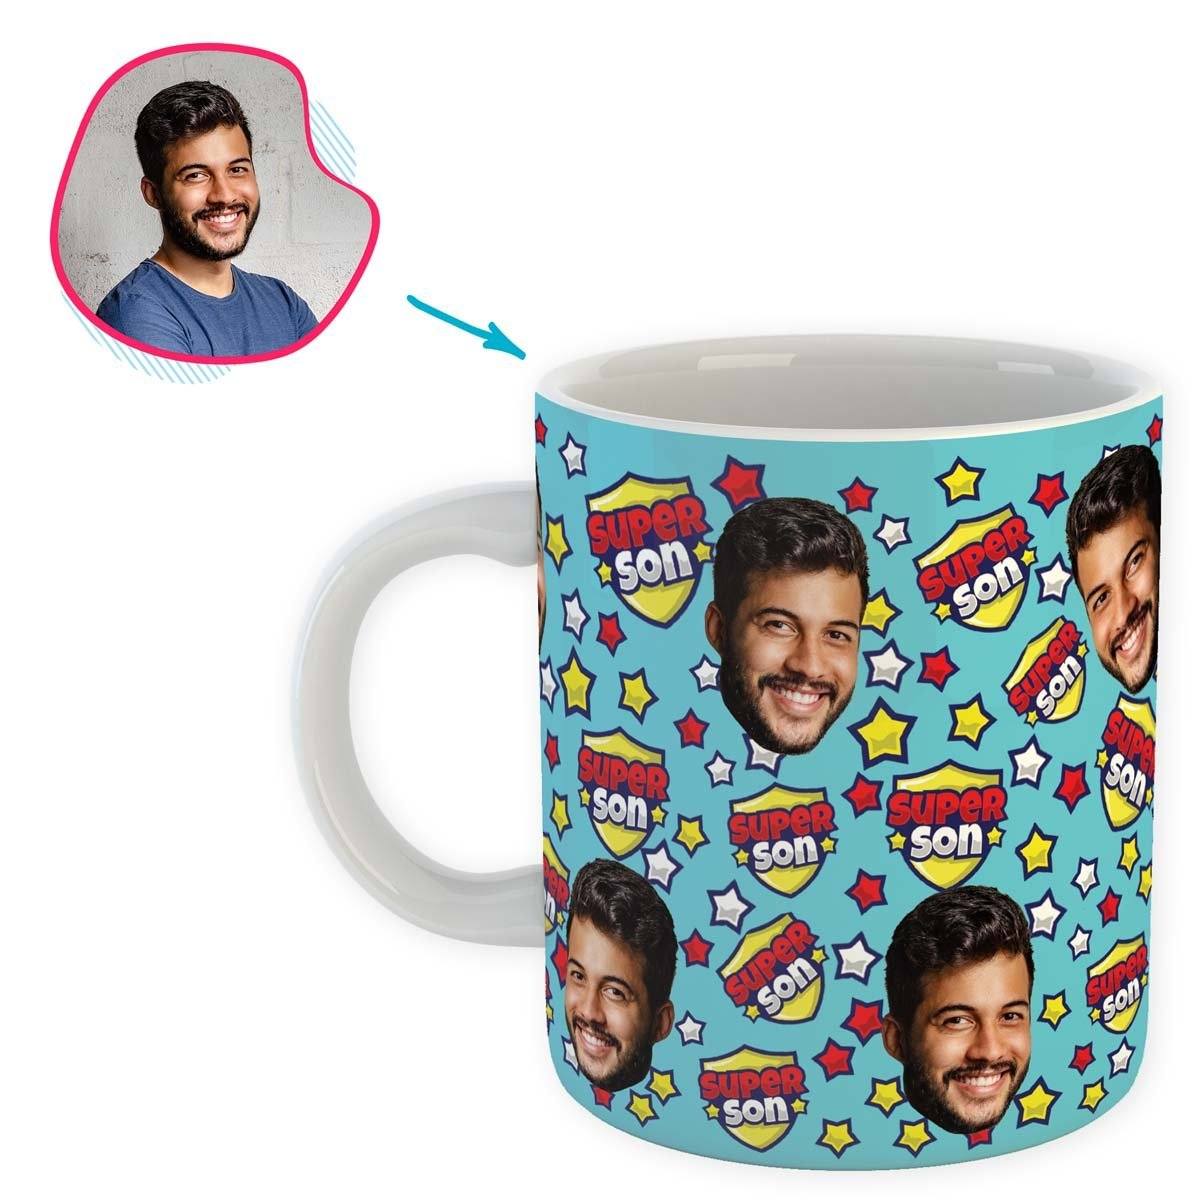 blue Super Son mug personalized with photo of face printed on it